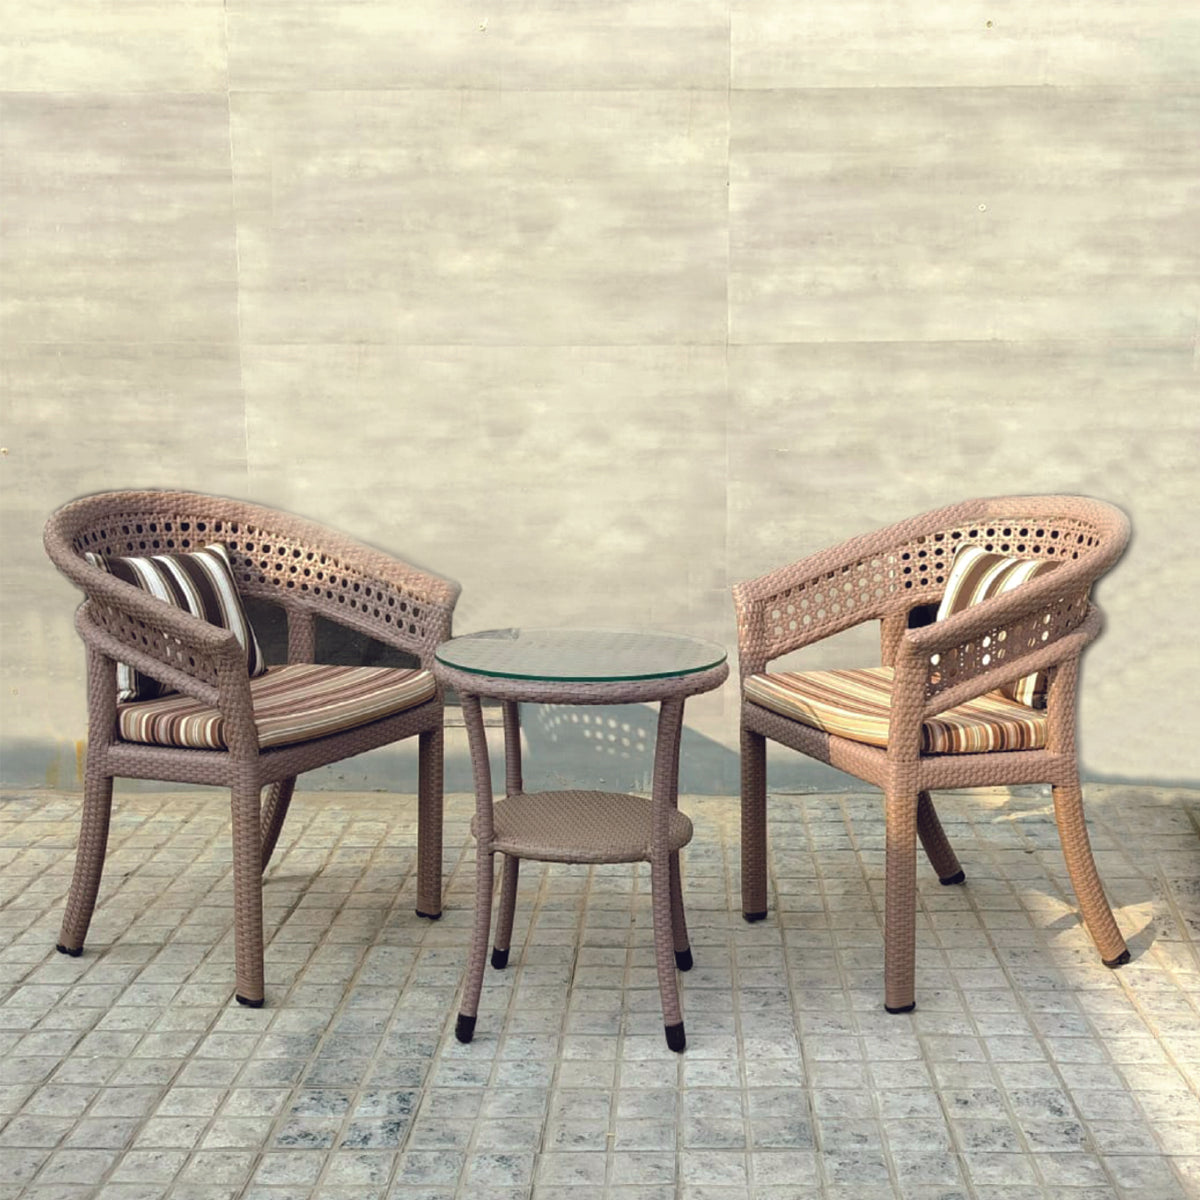 <b>VDC 618</b><br> BALCONY CHAIRS AND COFFEE TABLE